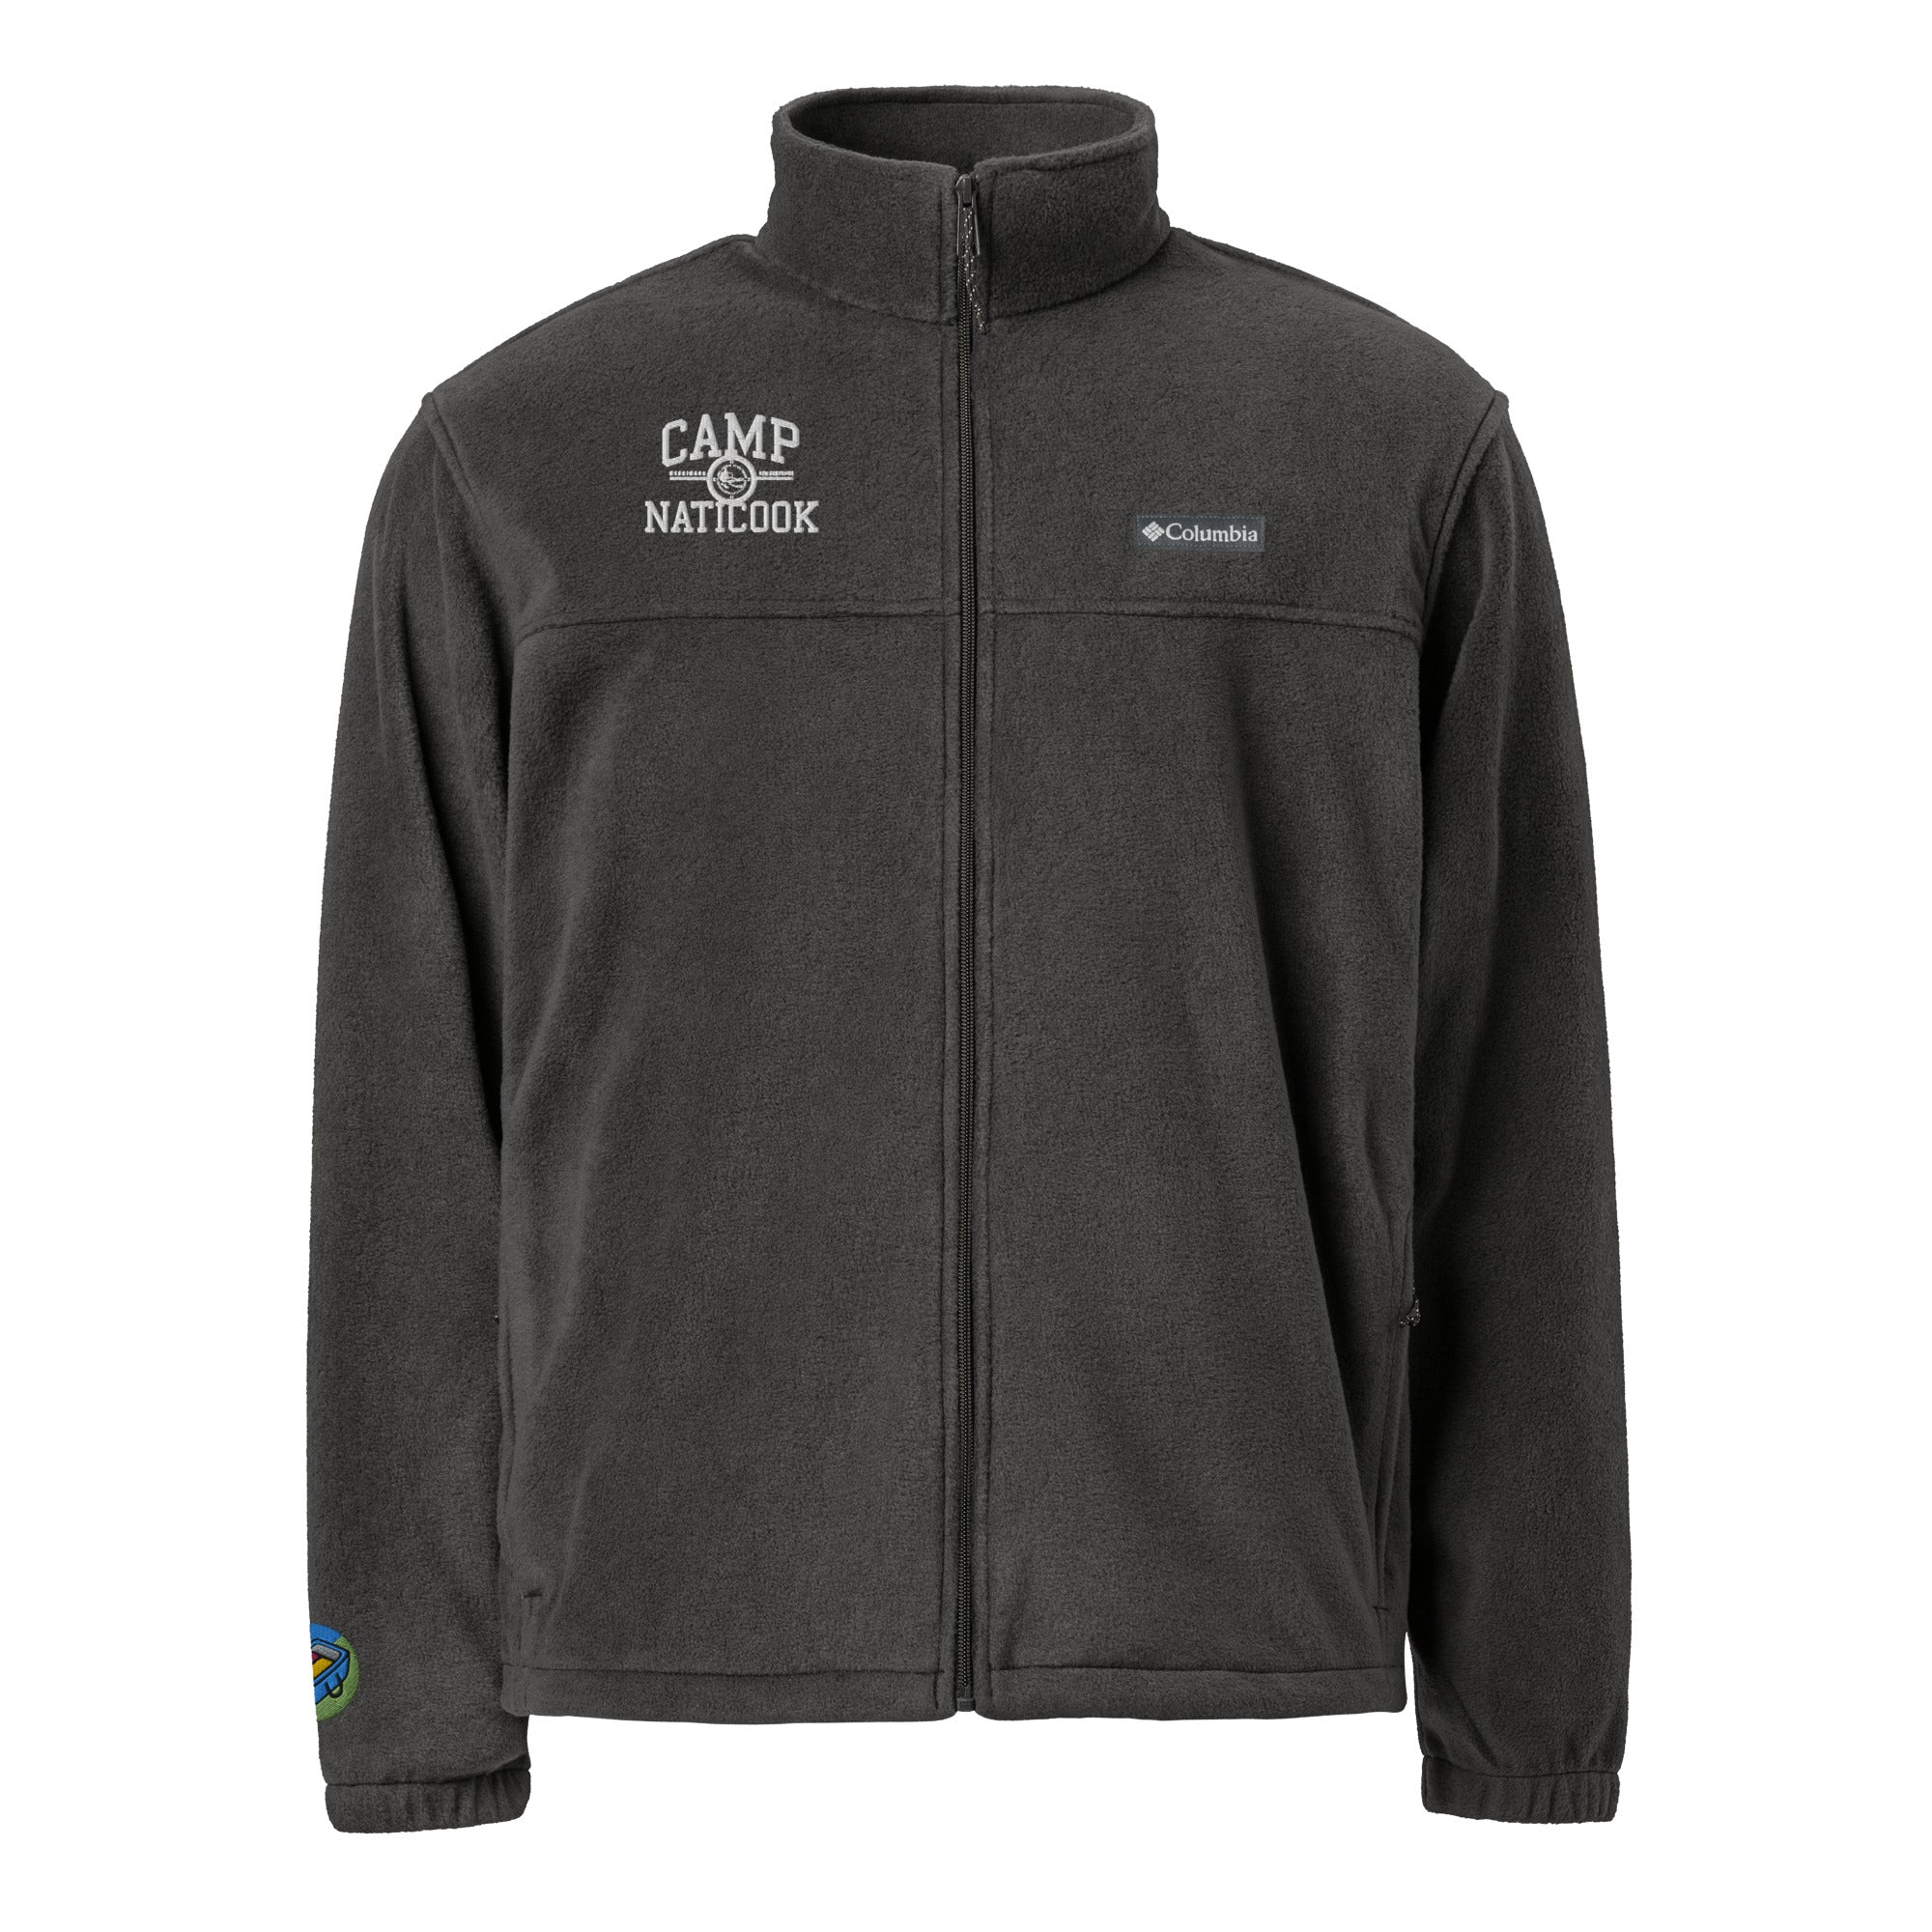 Camp Naticook Unisex Columbia Fleece jacket – Pack for Camp